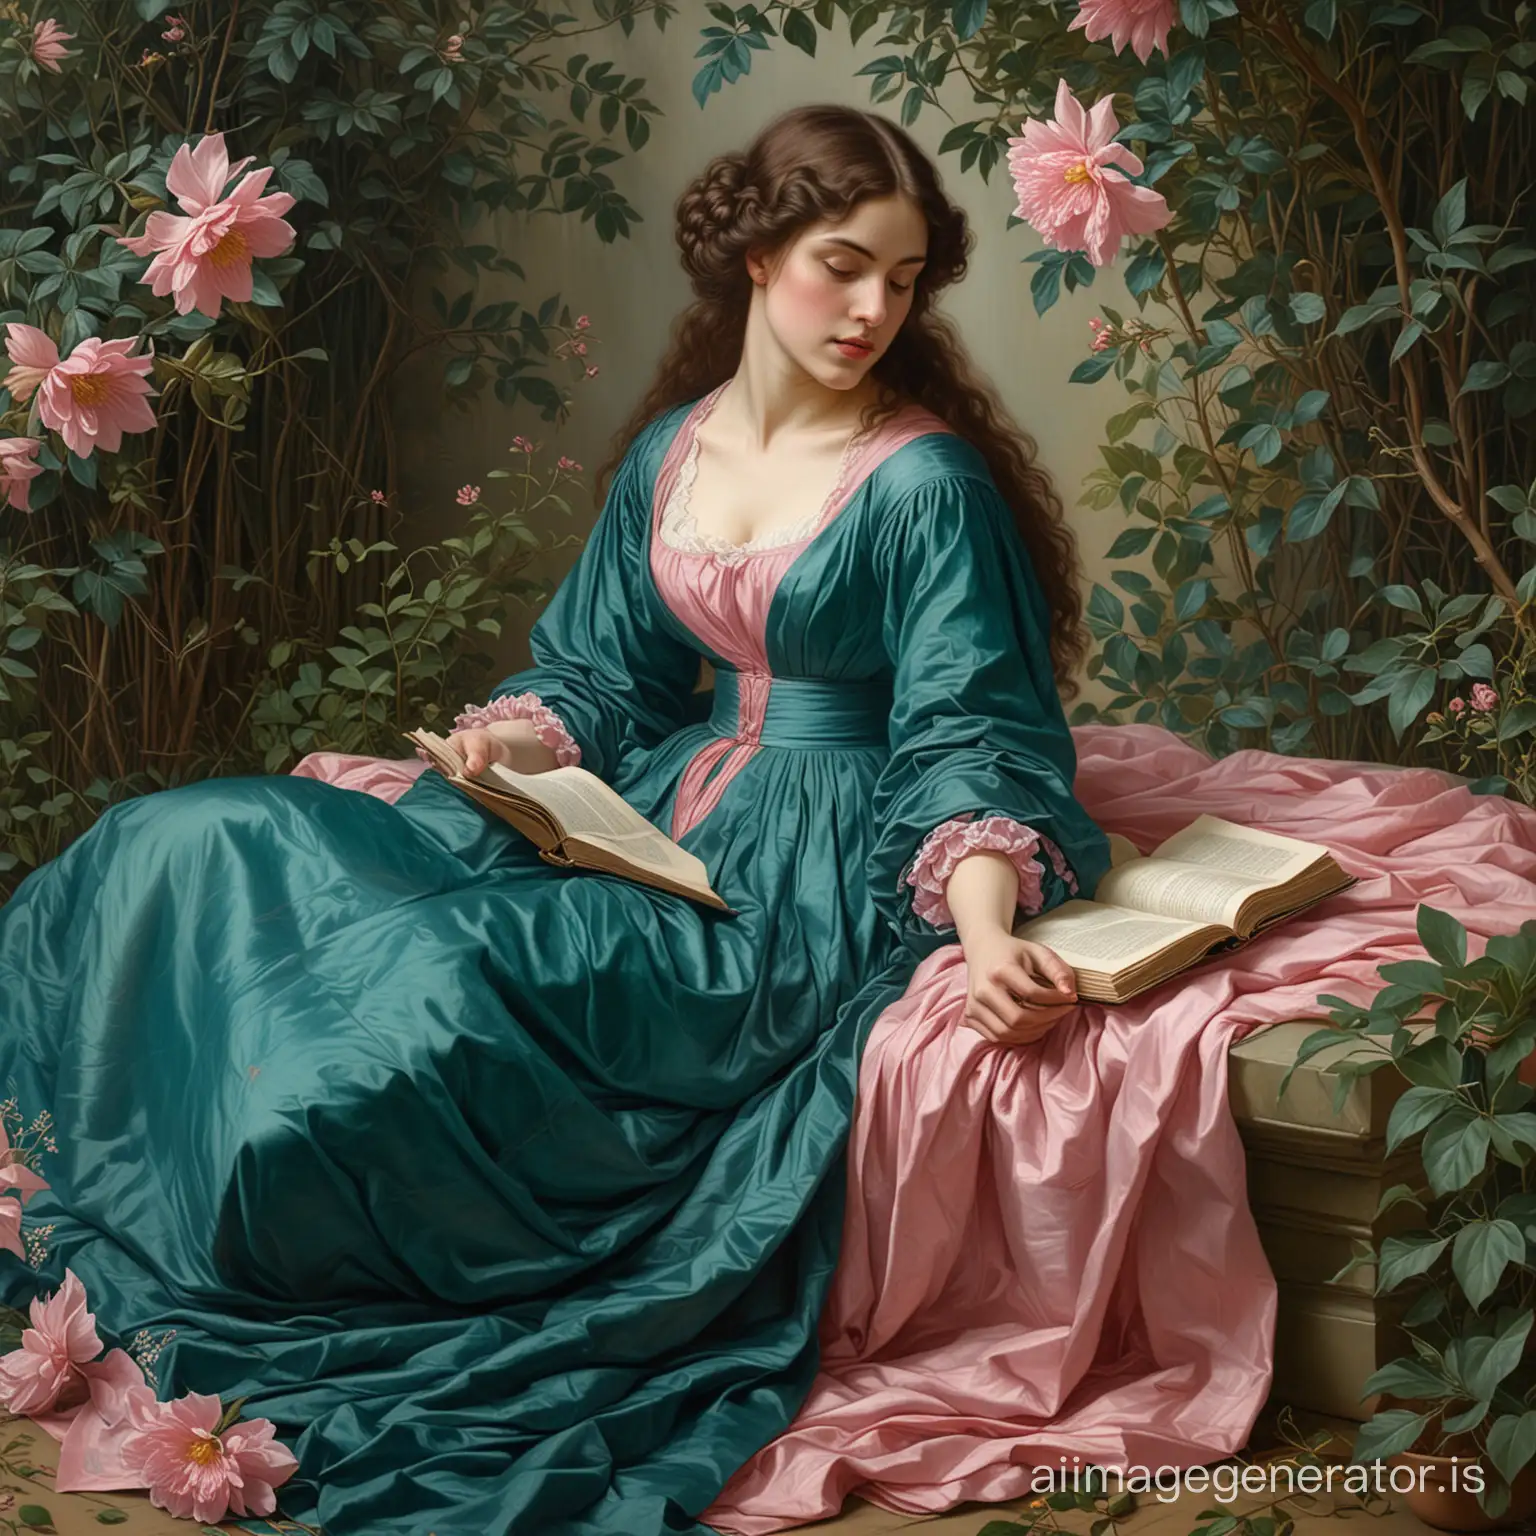 masterpiece, painting of the Pre-Raphaelites, a young woman with dark hair sits among the hederas, in full height, diagonal angle, dress of dark turquoise color, an open book, a partially unfolded pink flower in hand, sunlight filtering through plant branches, the style of the artist Dante Gabriel Rossetti